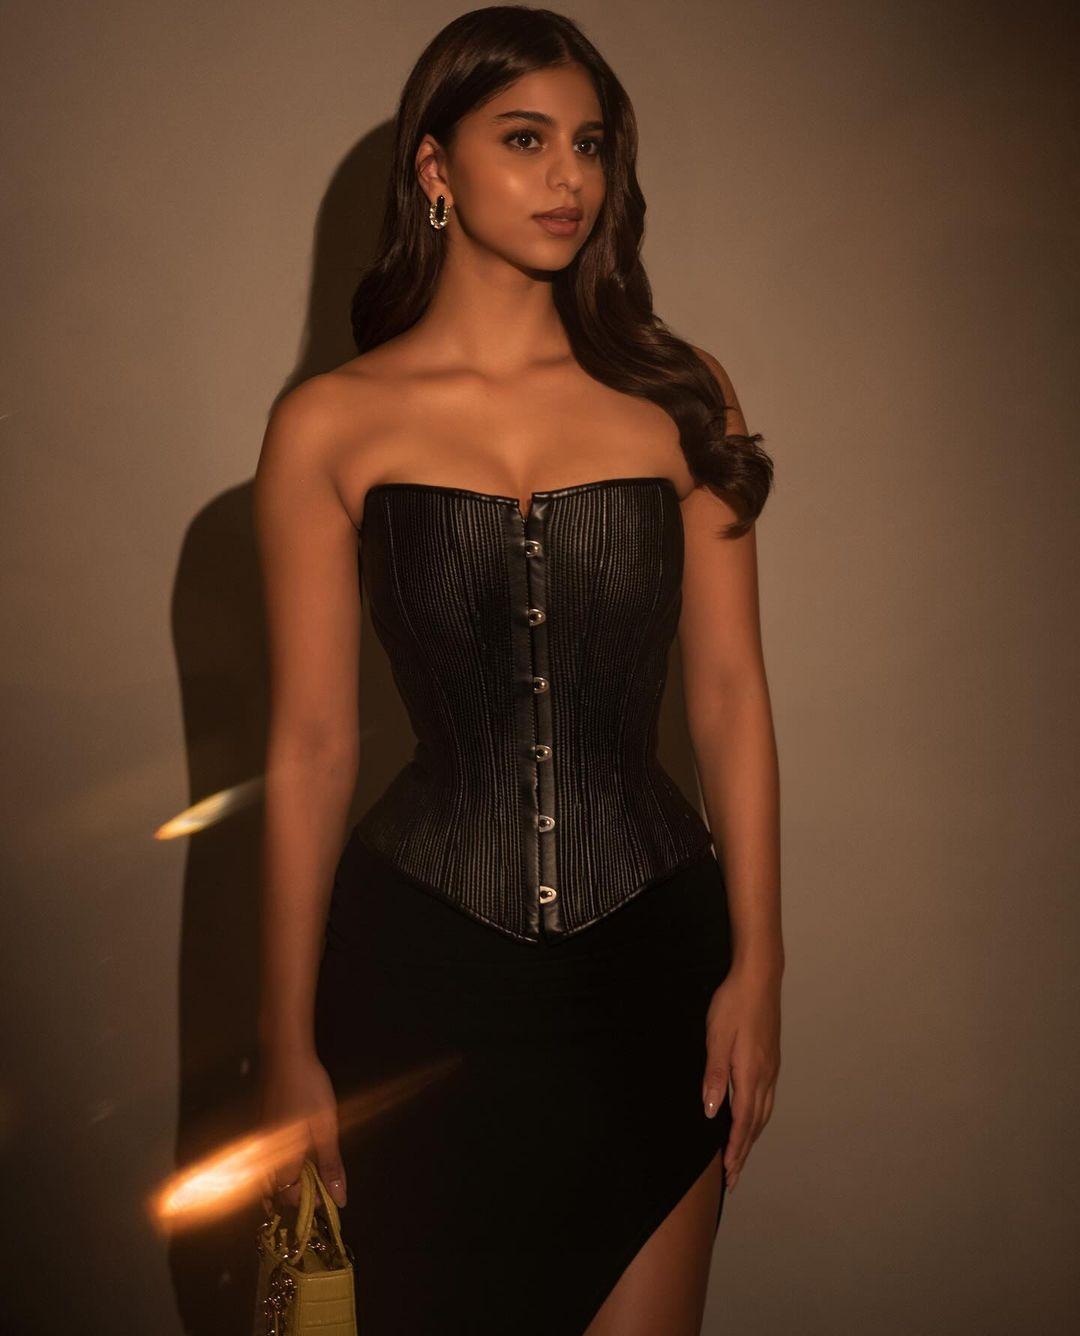 Suhana Khan looked stunning in a black strapless textured corset paired with a form-fitting black skirt featuring a high side slit. Despite her trendy style, she embraced classic elements.